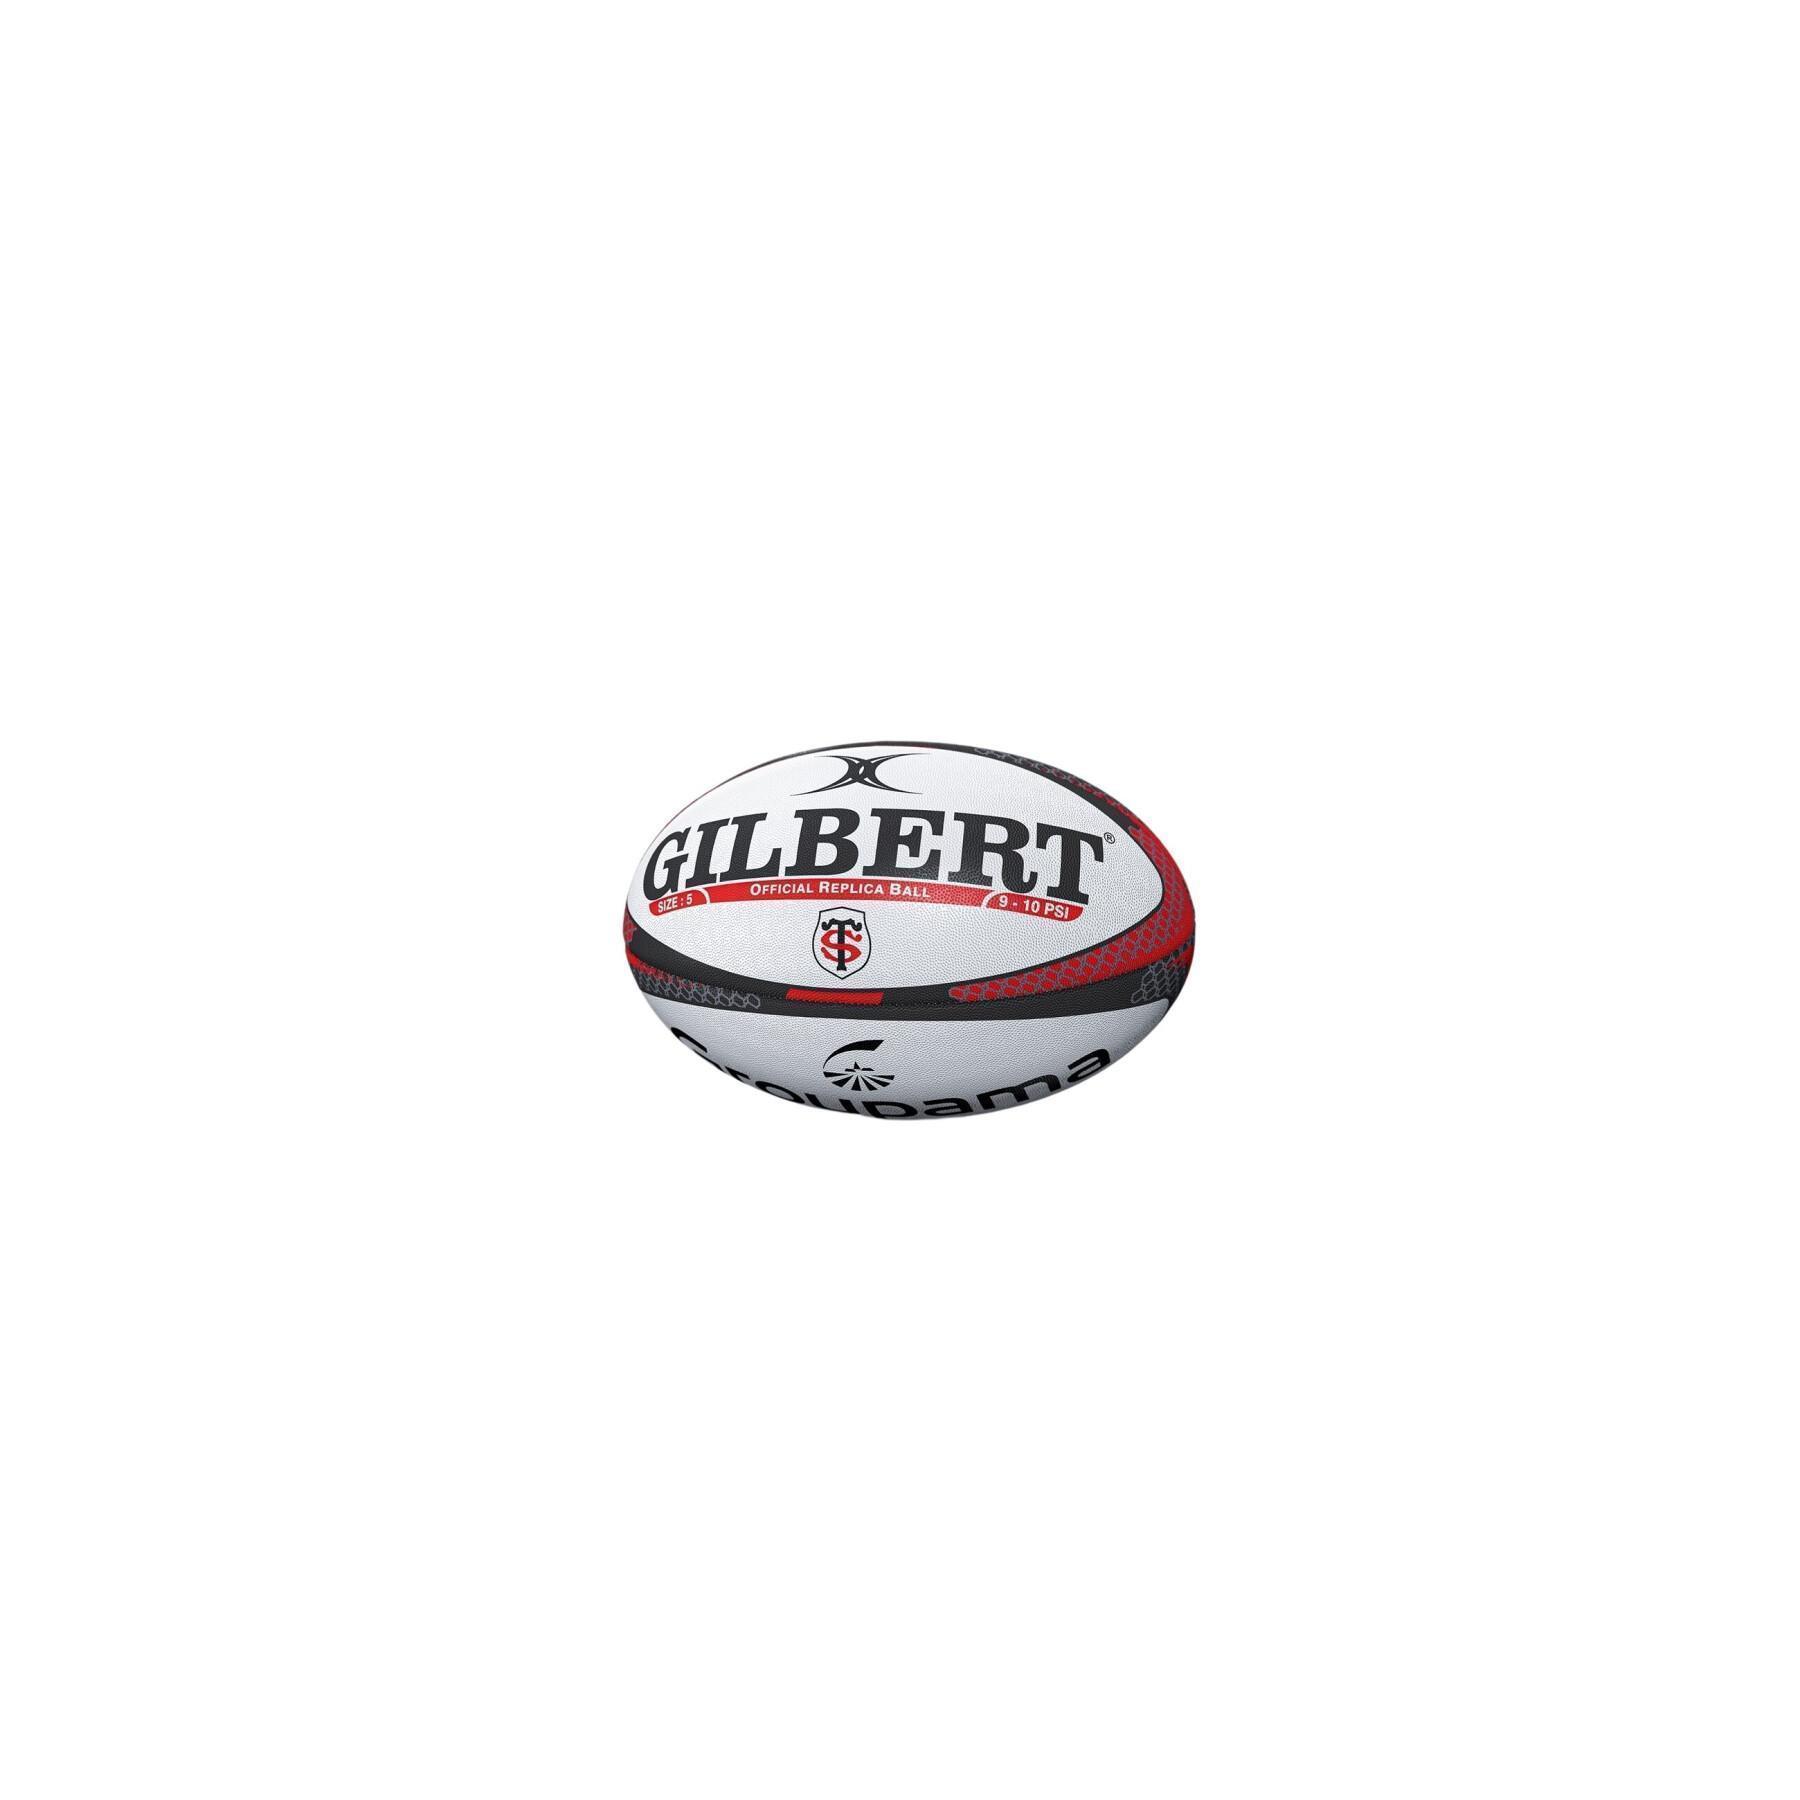 Toulouse stadium (stade Toulousain) rugby ball 